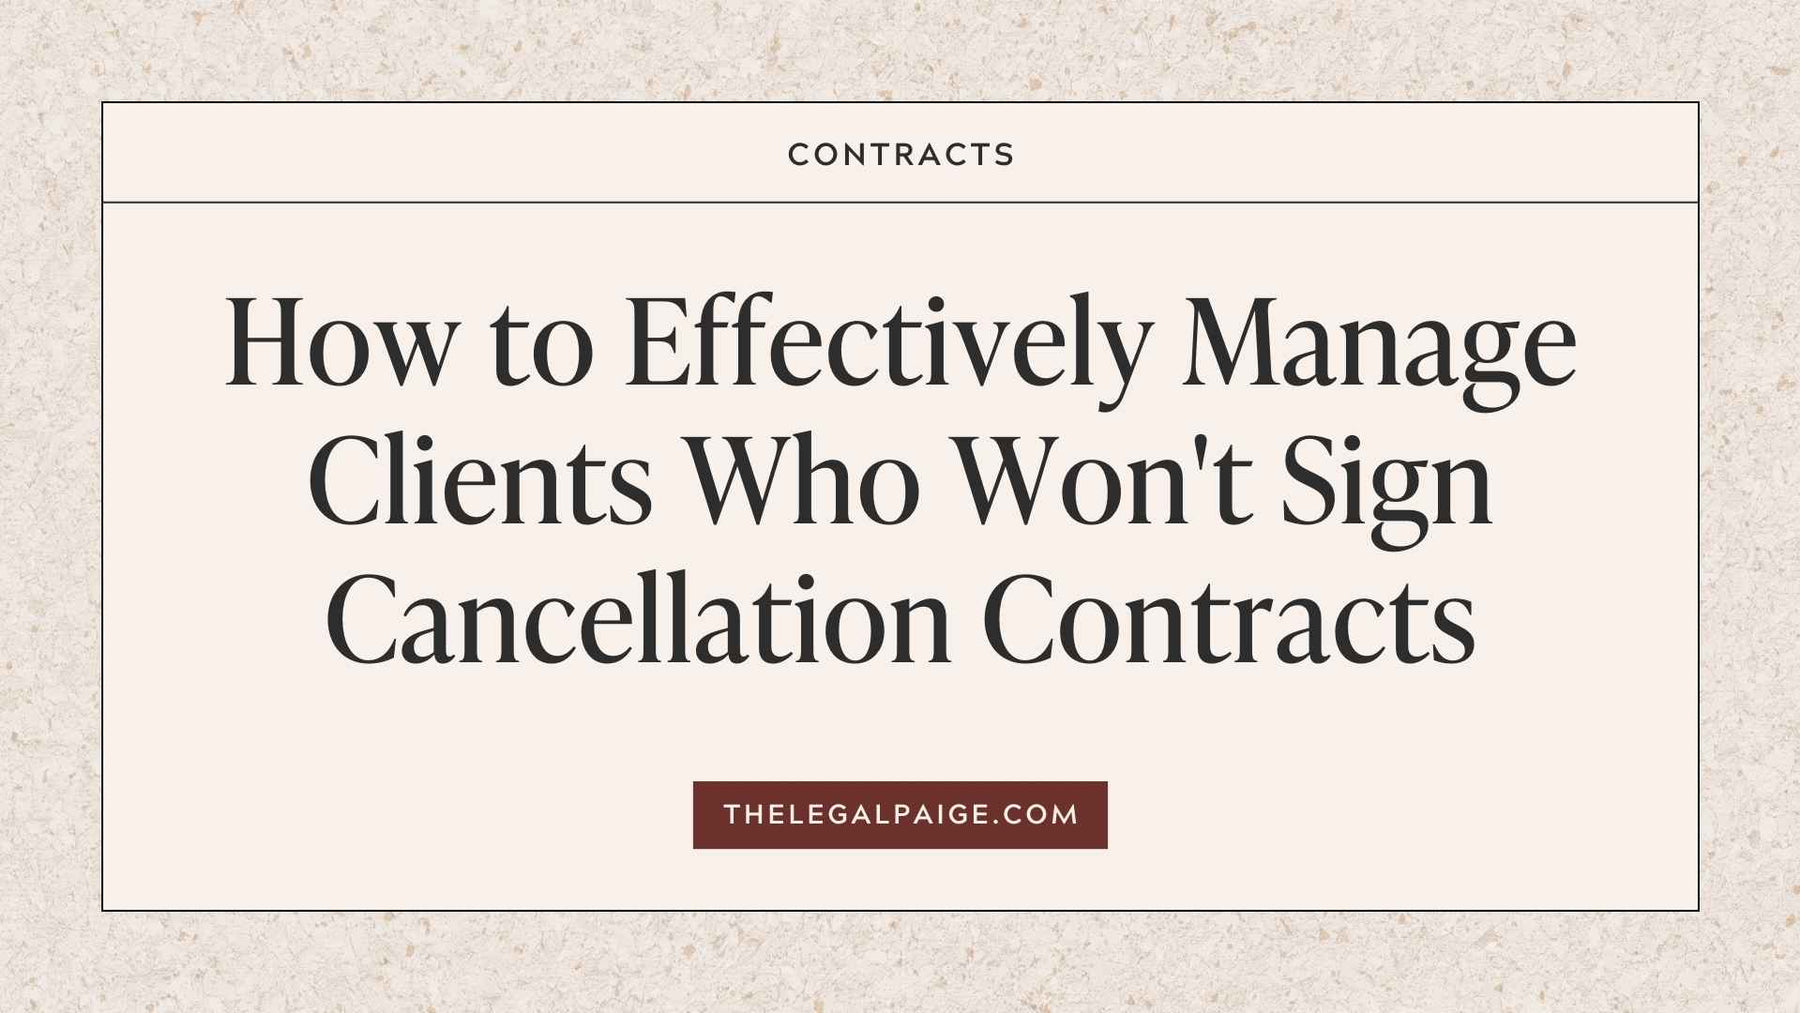 How to Effectively Manage Clients Who Won't Sign Cancellation Contracts